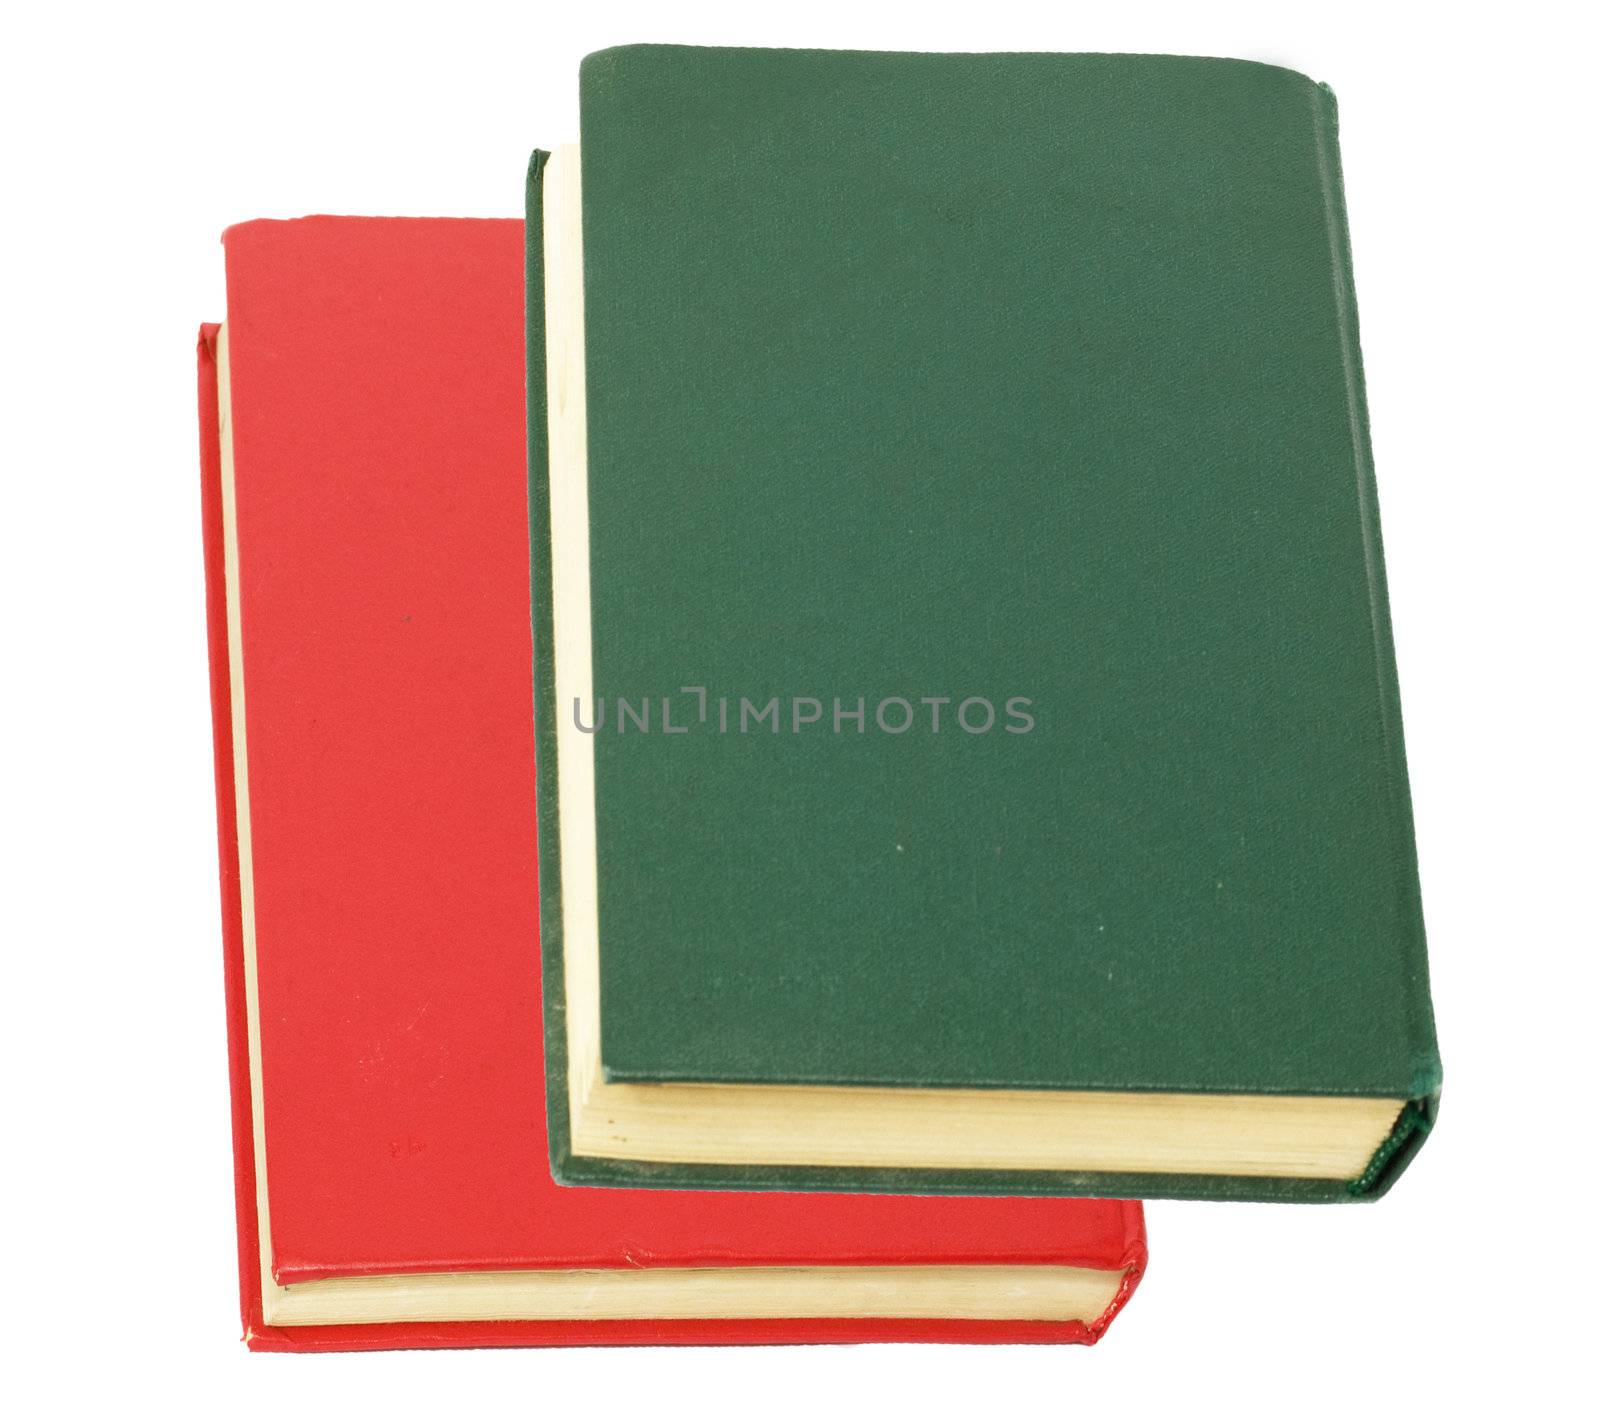 green book and red book on white background 